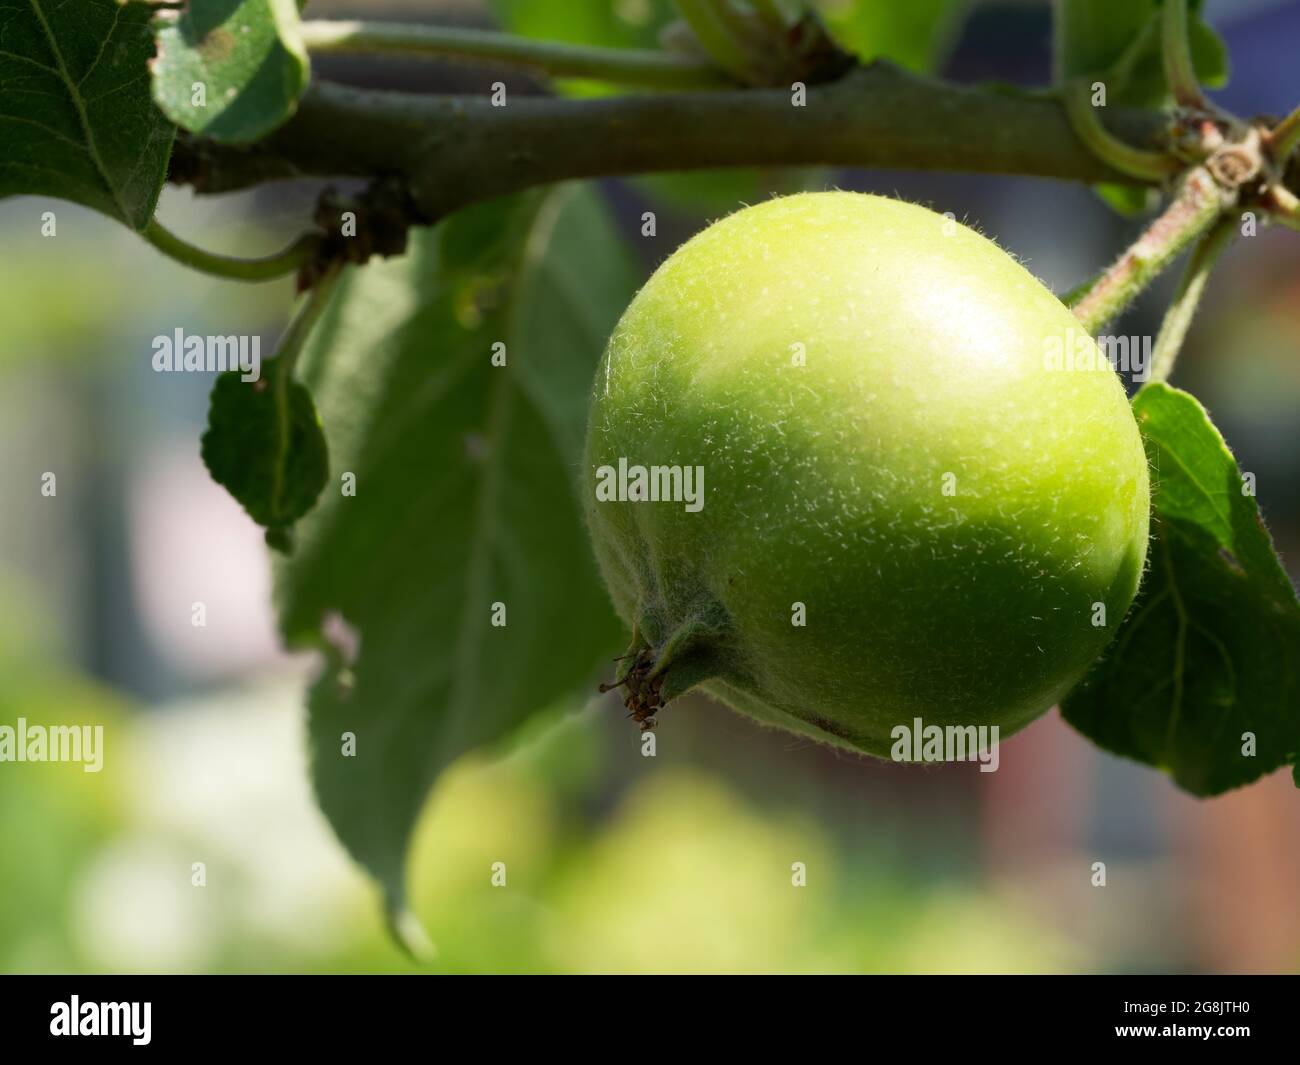 An unripe apple on a tree branch, close-up. An apple is an edible fruit produced by an apple tree (Malus domestica). Stock Photo